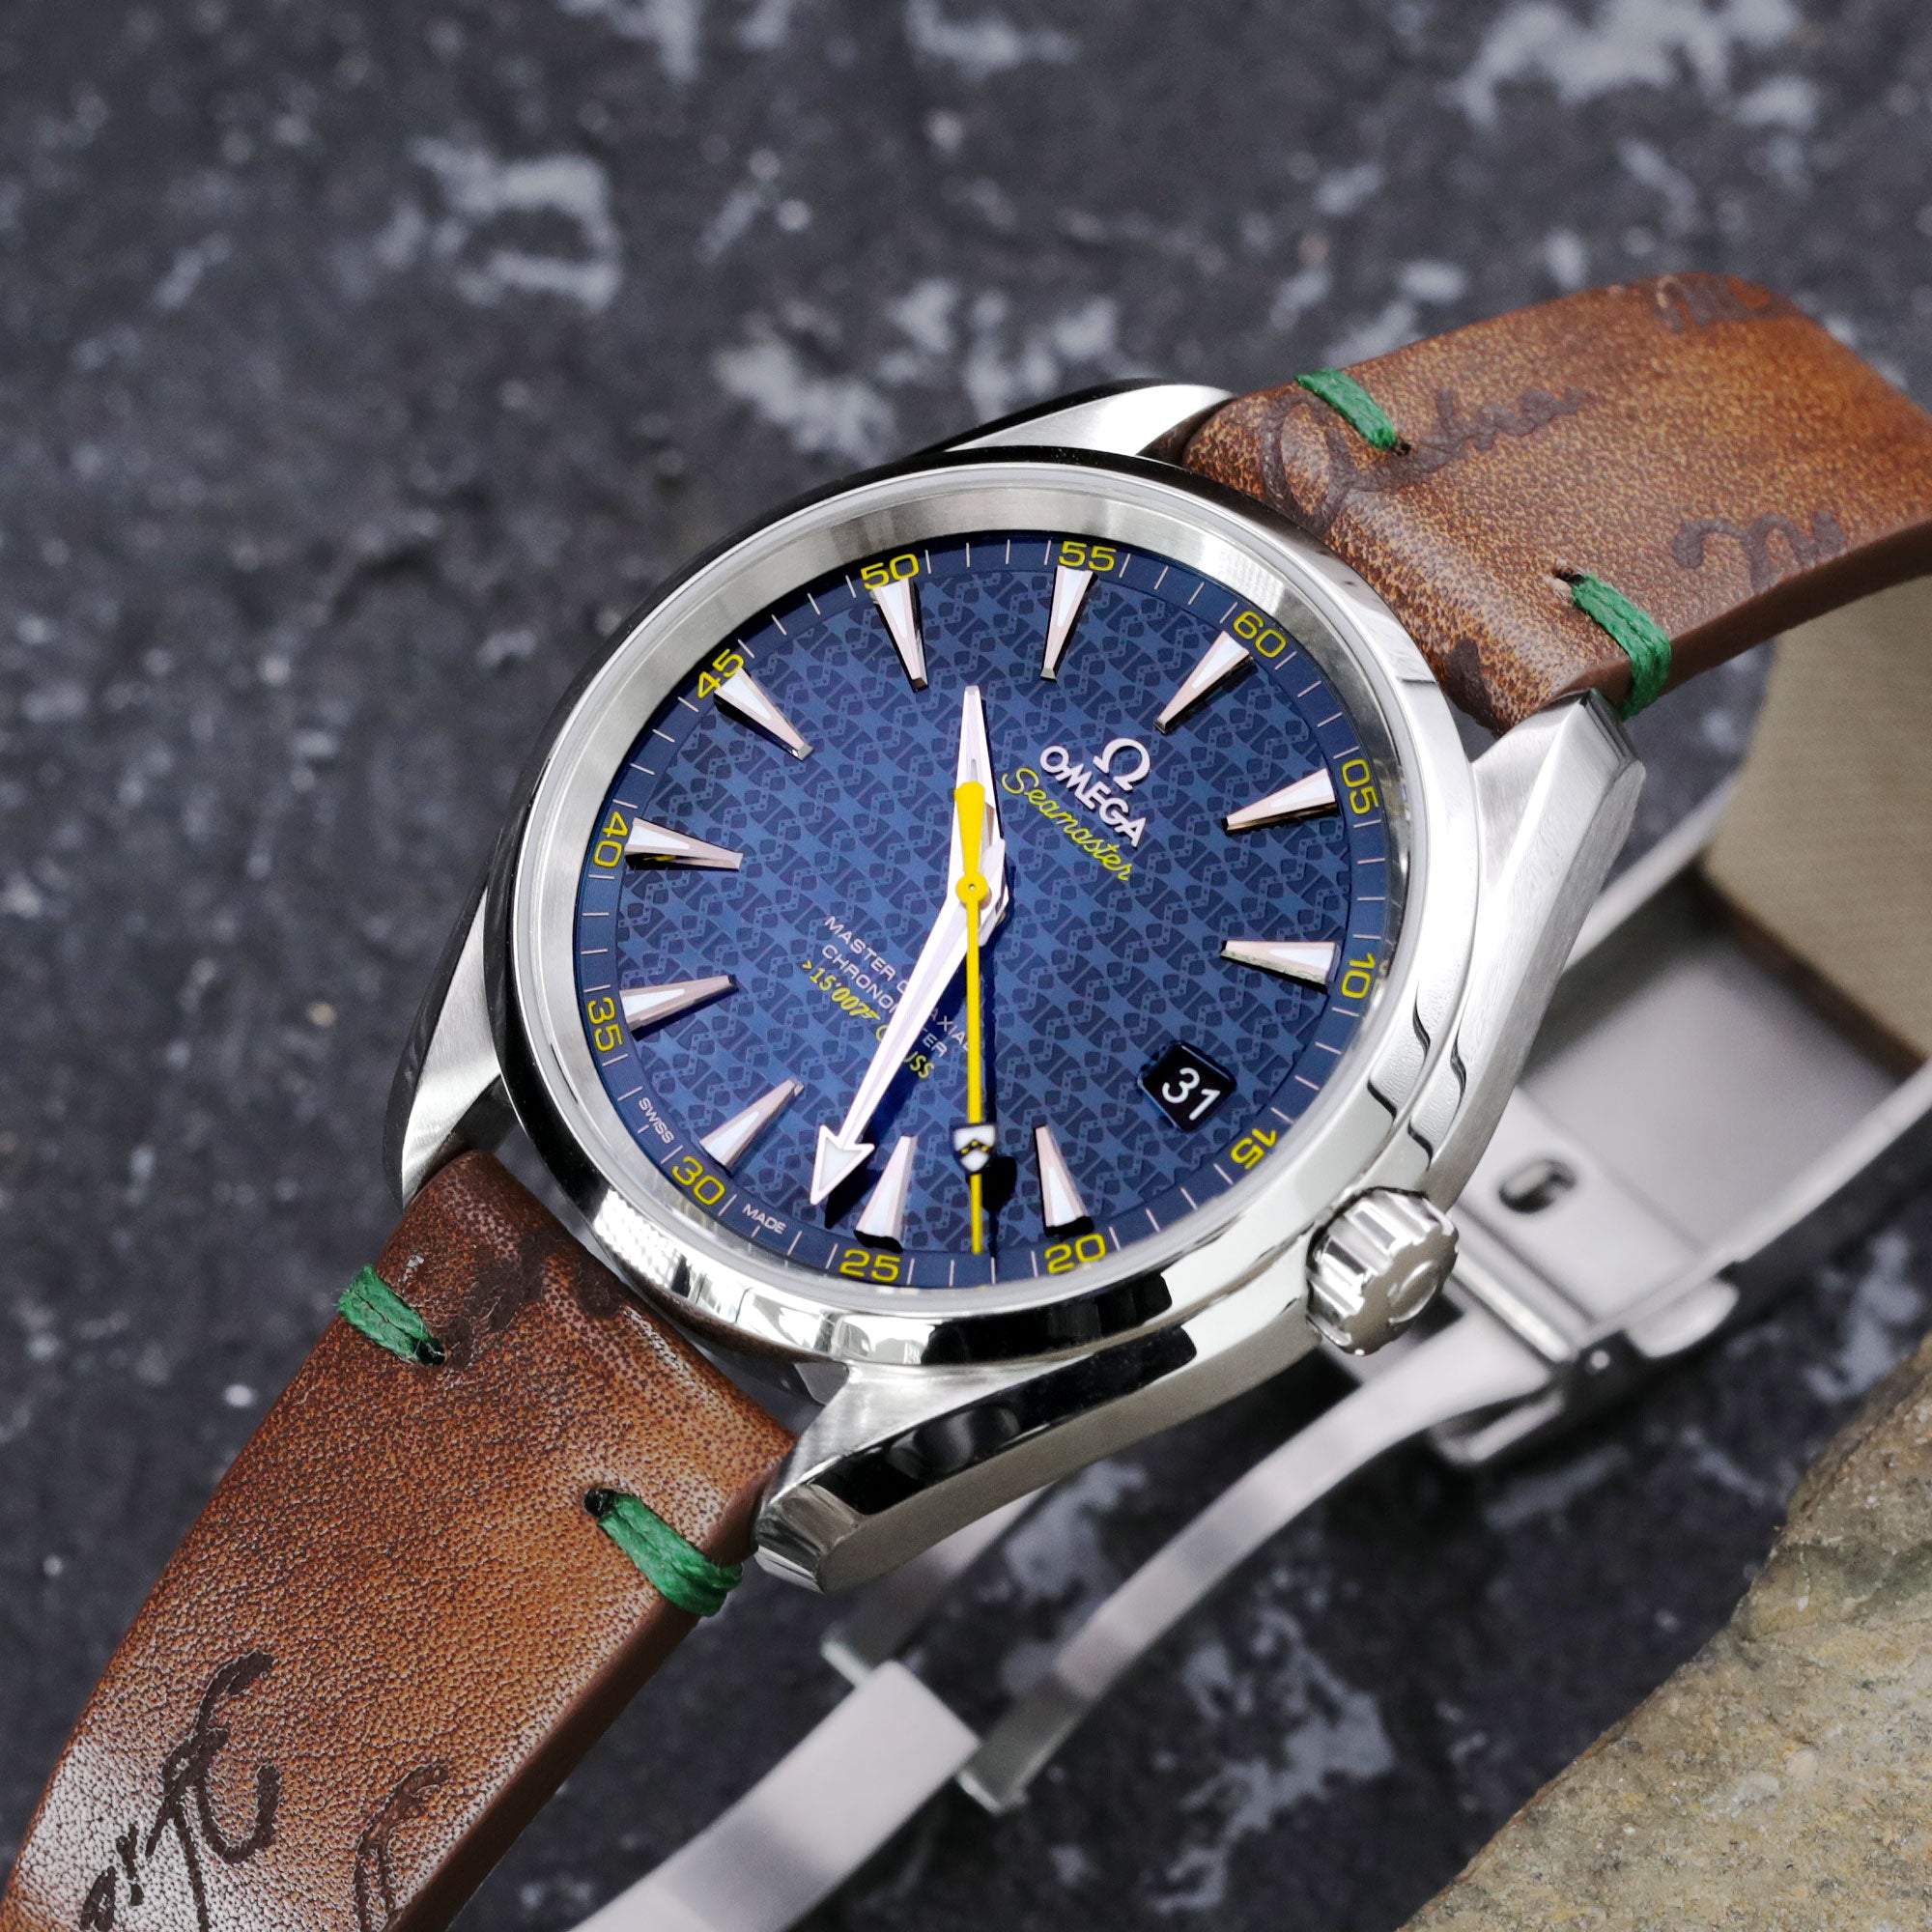 Strapcode Leather watch strap for Omega Seamaster Aqua Terra Spectre James Bond Watch 231.10.42.21.03.004